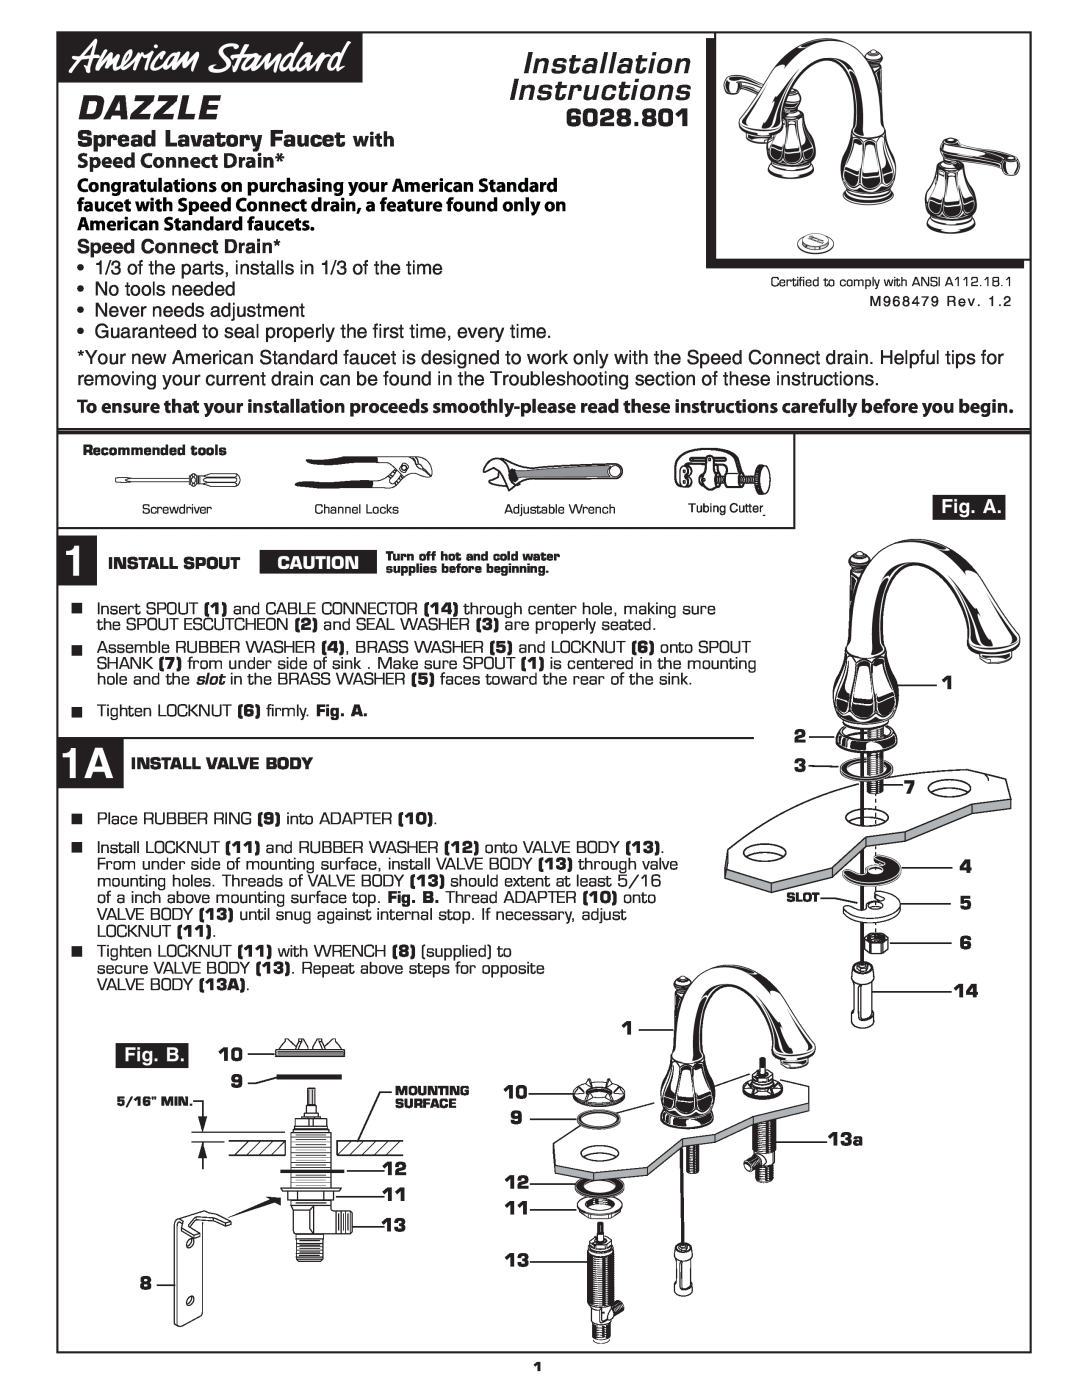 American Standard 6028.801 installation instructions Spread Lavatory Faucet with, Speed Connect Drain, Dazzle, Fig. A 